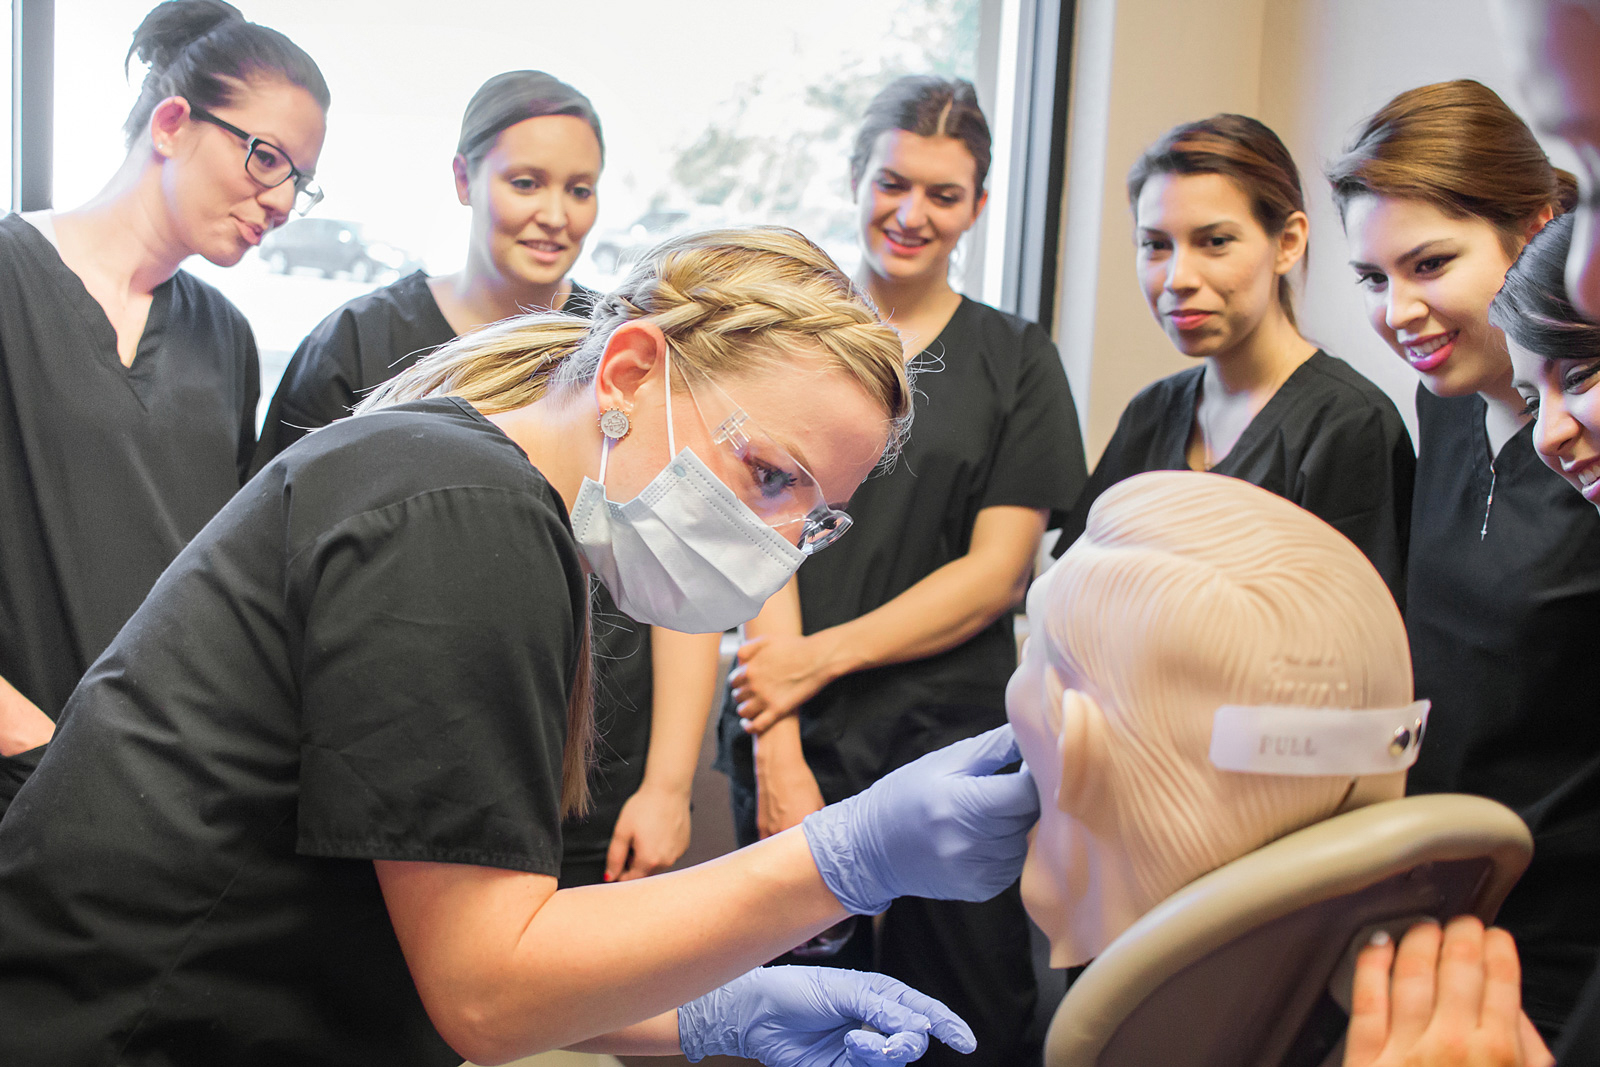 What To Look For in a Dental Assistant Training Program